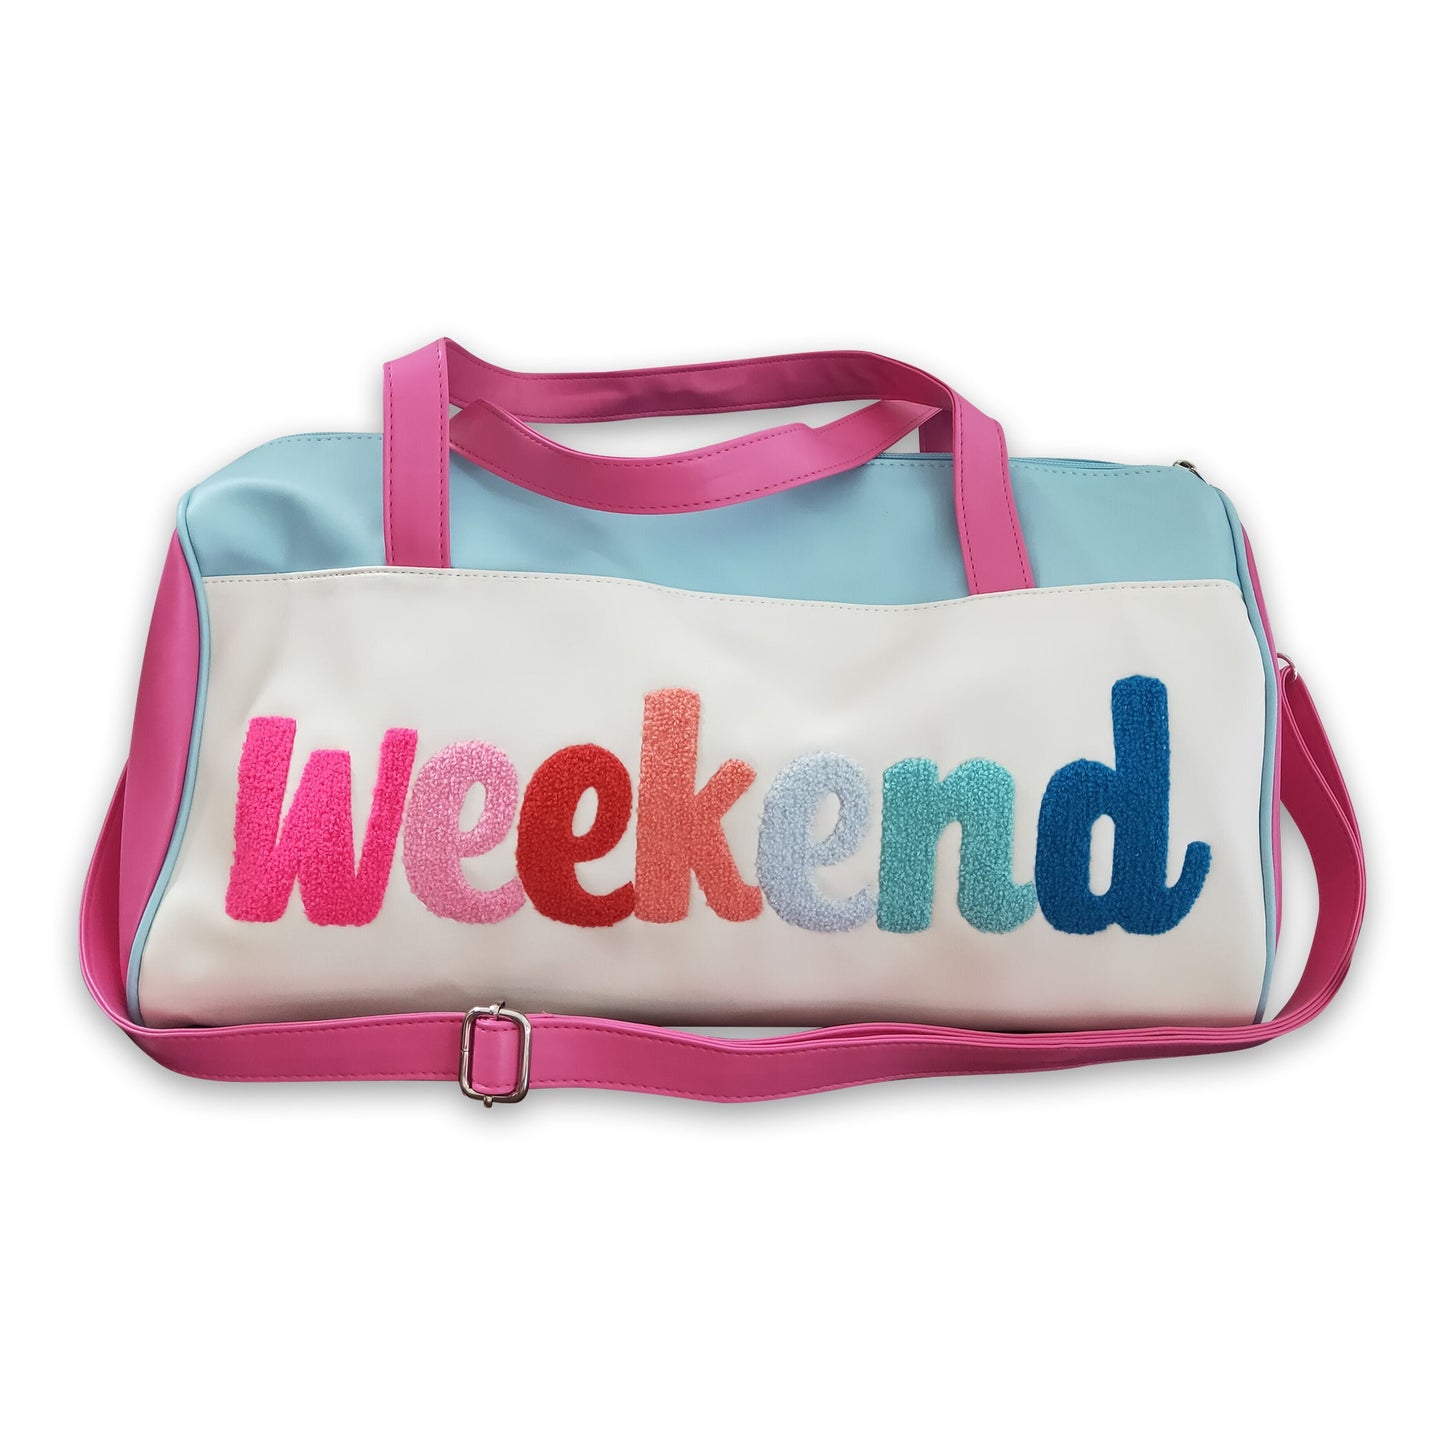 Leather colorful weekend girls bags